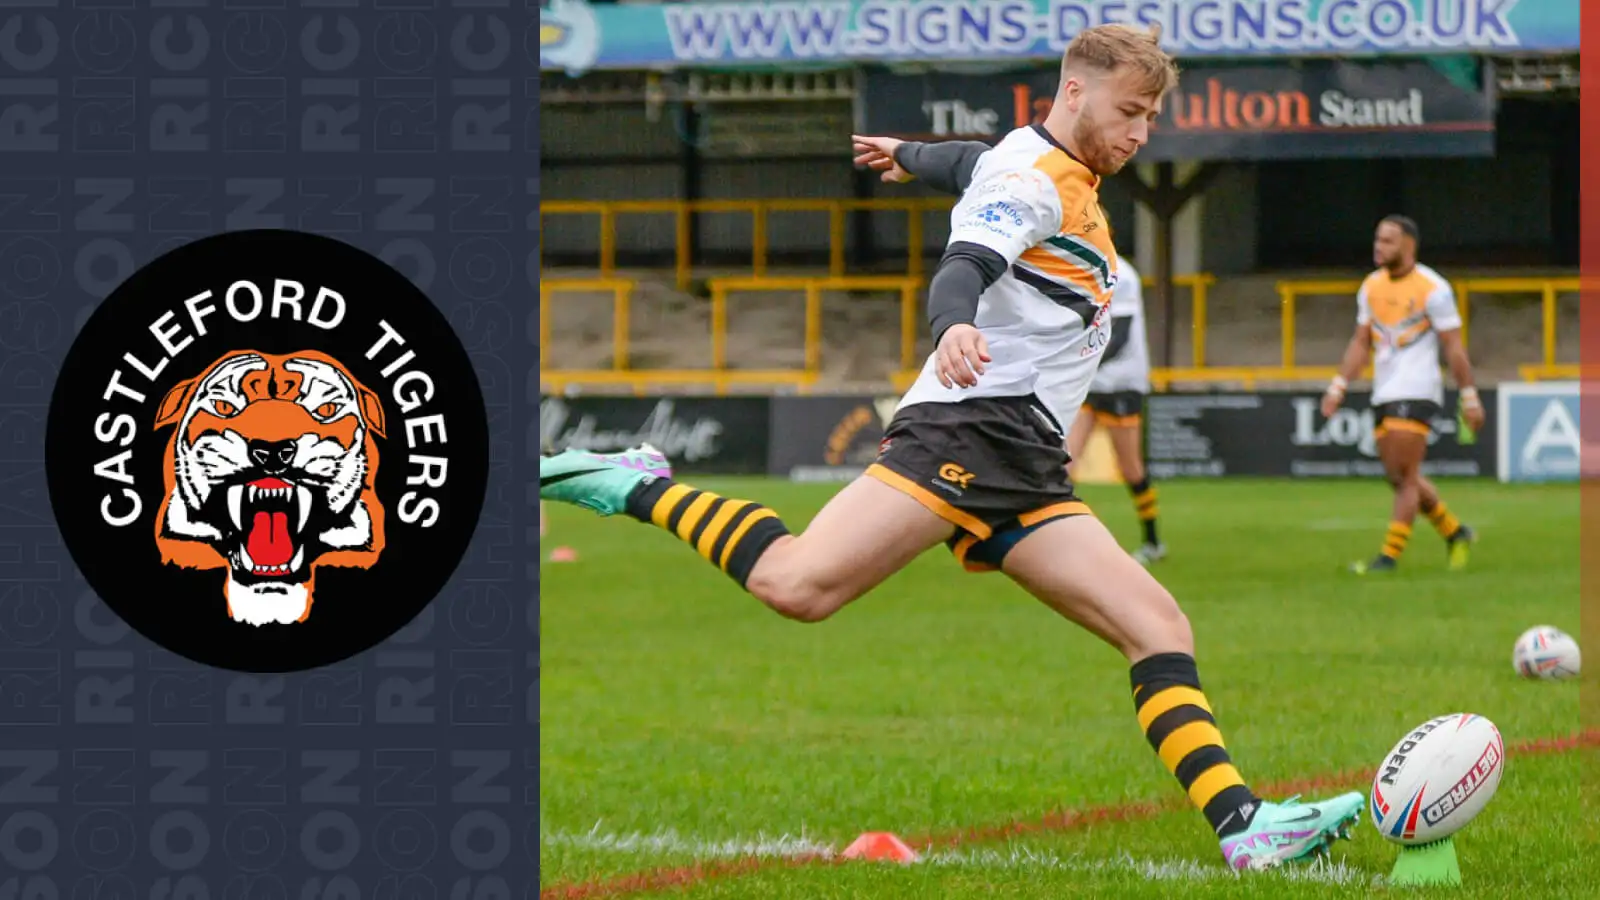 Castleford Tigers ace Danny Richardson details his harrowing road to recovery ahead of Super League comeback